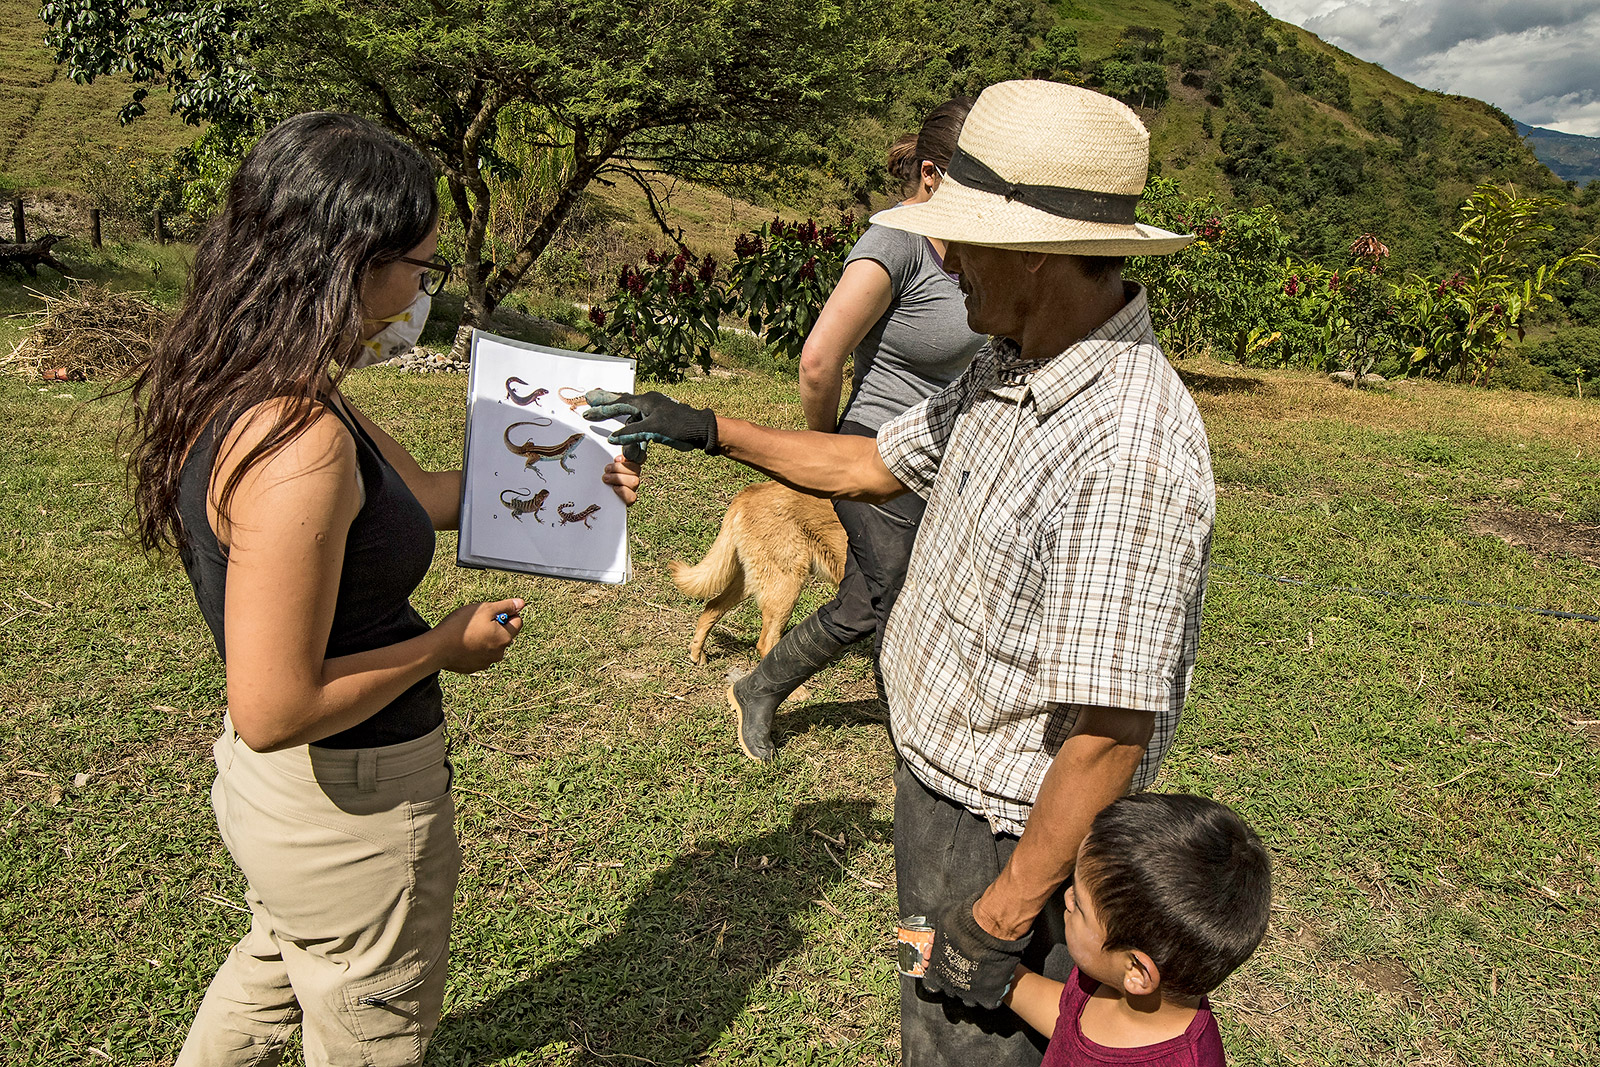 Image showing biologist Amanda Quezada interviewing local people about the blue whiptail